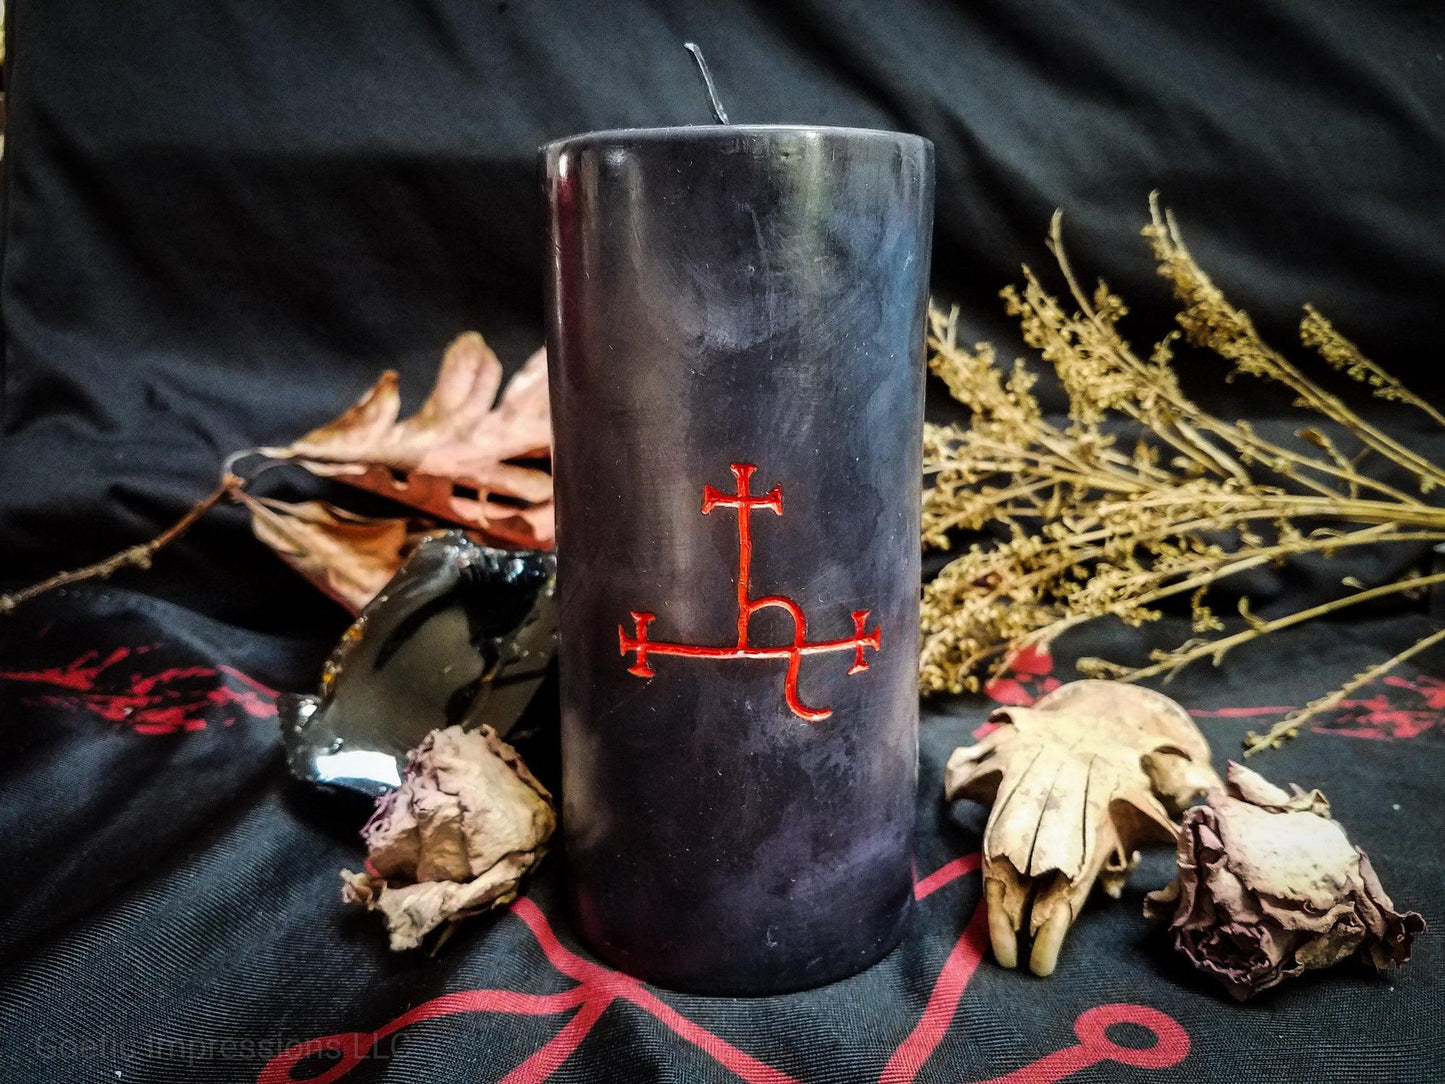 Black pillar candle with red Lilith sigil carved into it